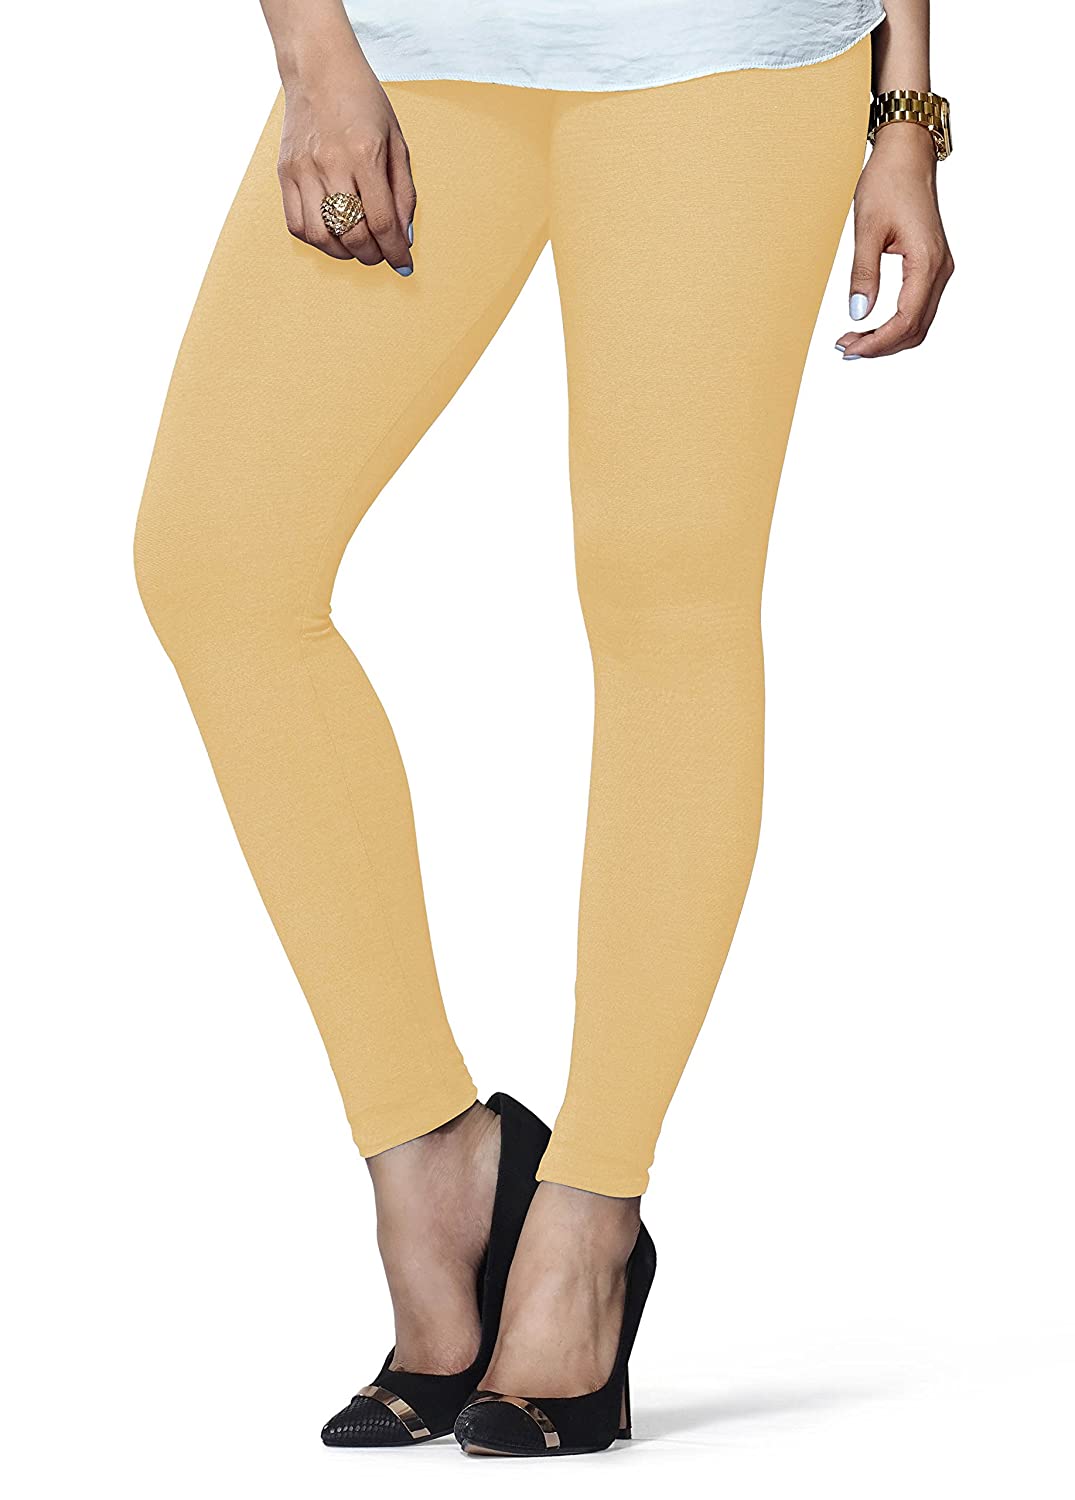 N I S H - LUX Lyra Leggings Available in 100+ colours